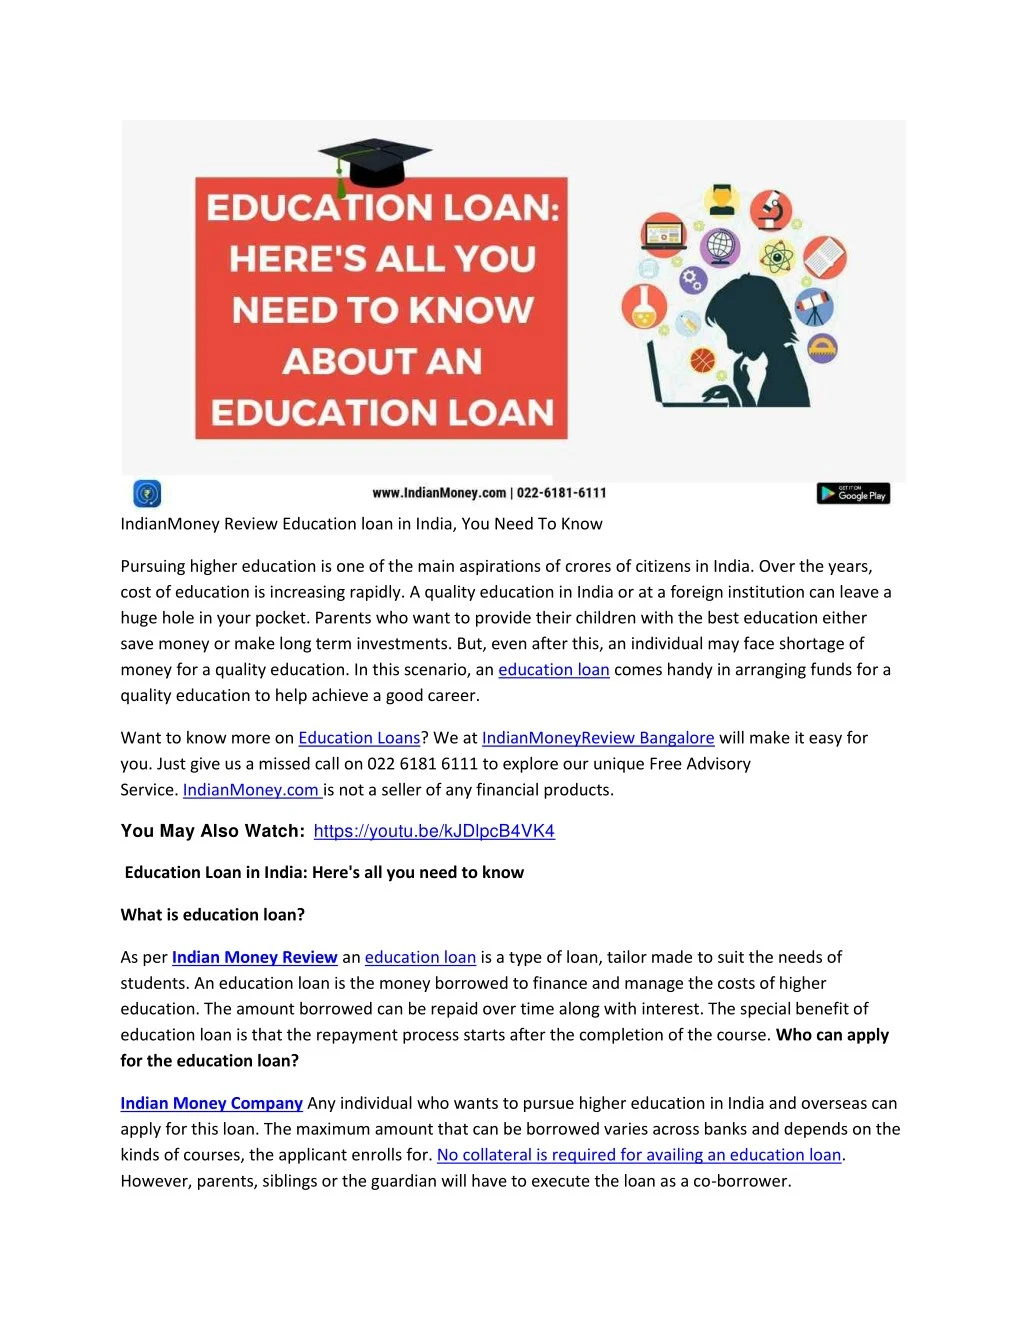 indianmoney review education loan in india